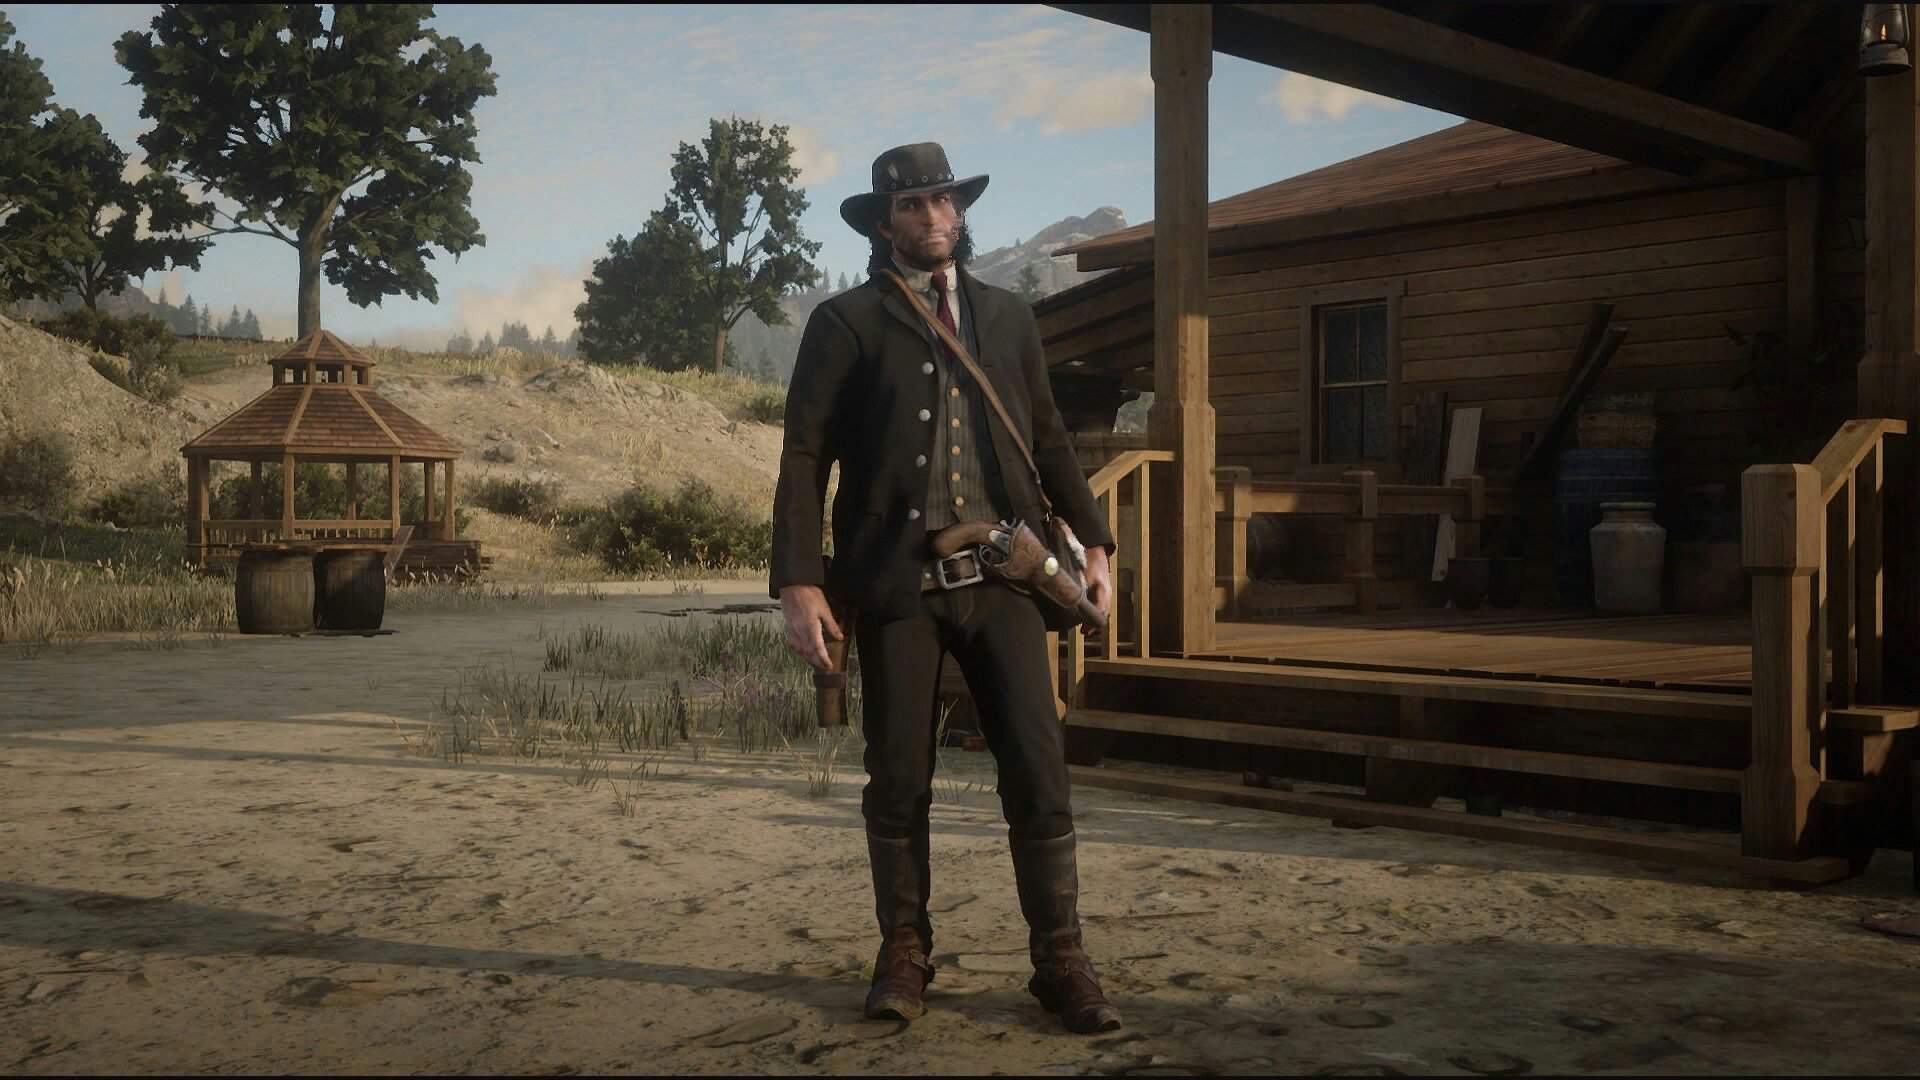 Rdr1 outfits in rdr2 #1 | The Red Dead Redemption Amino